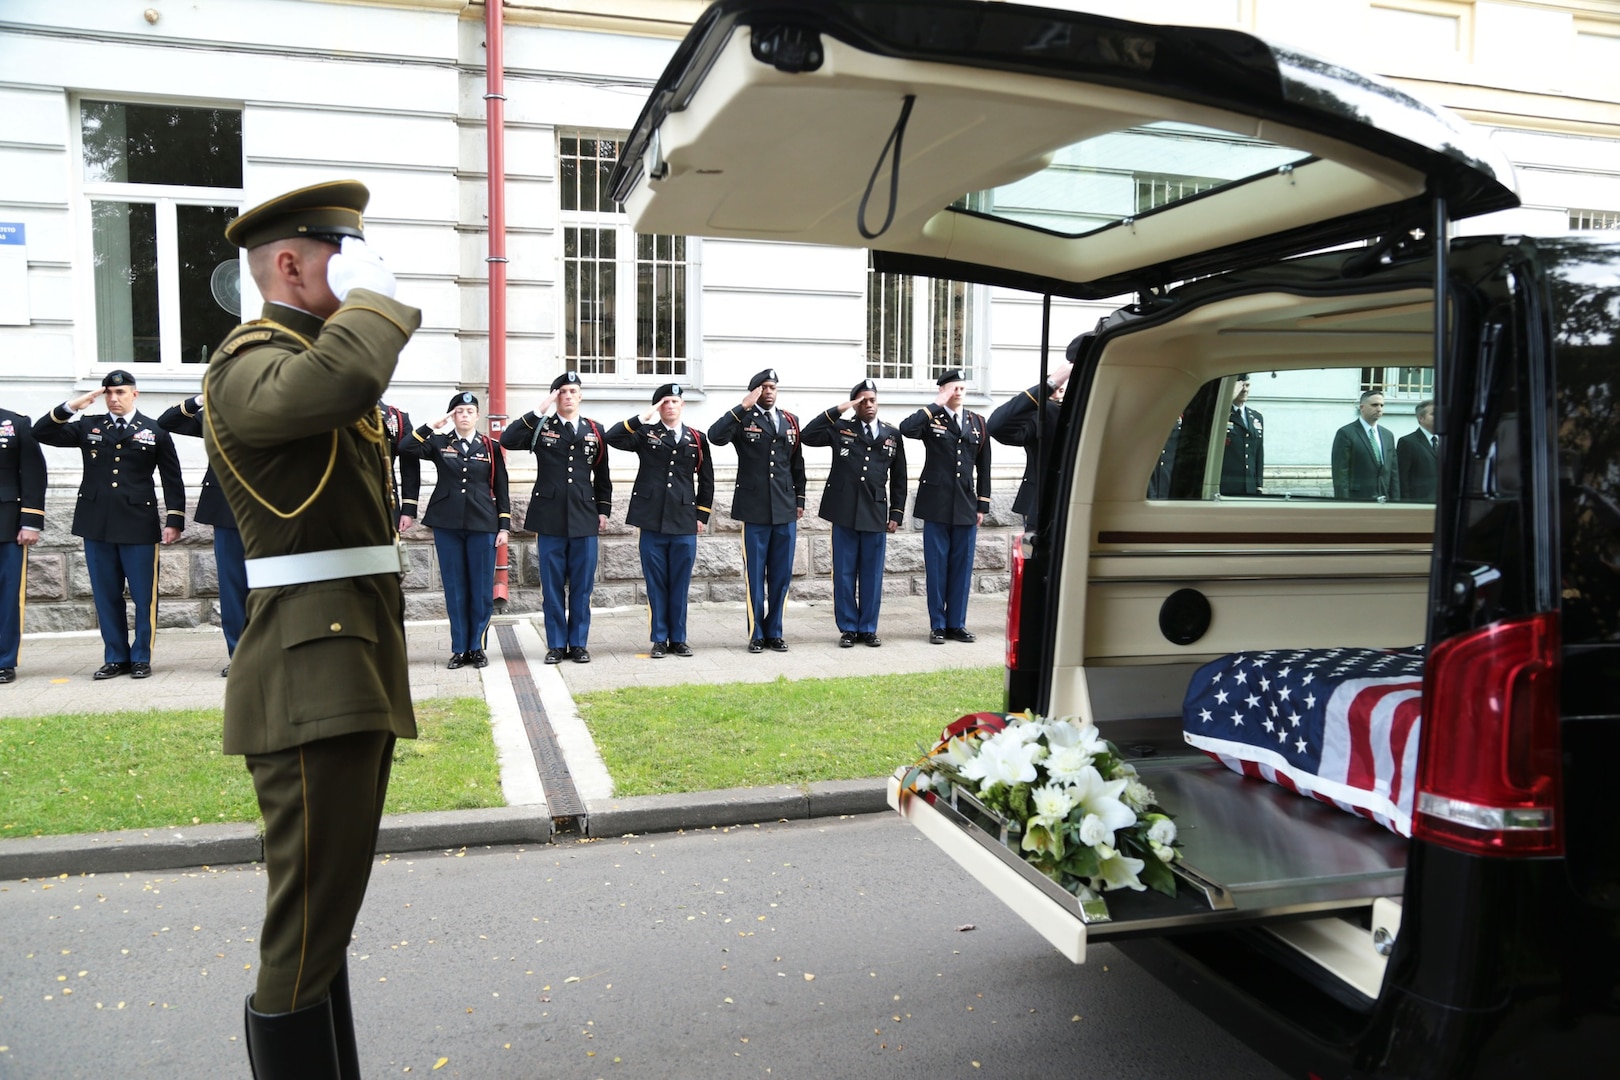 On Sept 16. 2021 Lithuanian officials conducted a honorable carry of remains ceremony. Several sets of WWII-era remains exhumed in Lithuania were prepared to be escorted back home to their final resting place in the United States. The airmen served on different B-17 bomber crews who were shot down in early 1944 and perished in a German POW camp in Lithuania. Ambassador Gilchrist was honored to attend the ceremony, alongside Vice Minister of National Defense Margiris Abukevičius, Archbishop Gintaras Grušas, members of the U.S. and Lithuanian Armed Forces, representatives from the U.S. Embassy, and others who honored the airmen's service and sacrifice. (U.S. Embassy Photos)